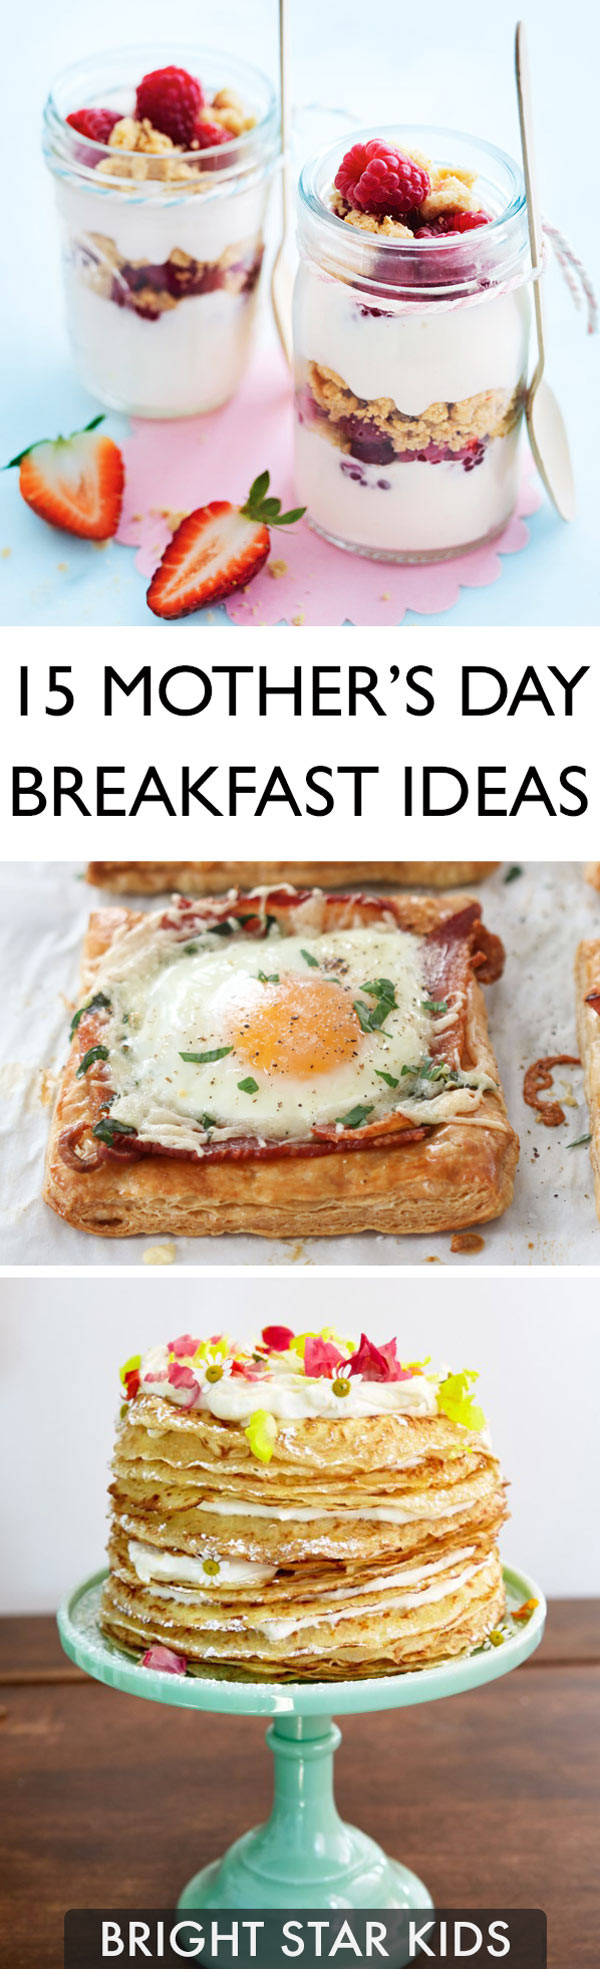 Breakfast Ideas For Mother's Day
 15 Mother s Day Breakfast or Brunch Ideas Bright Star Kids